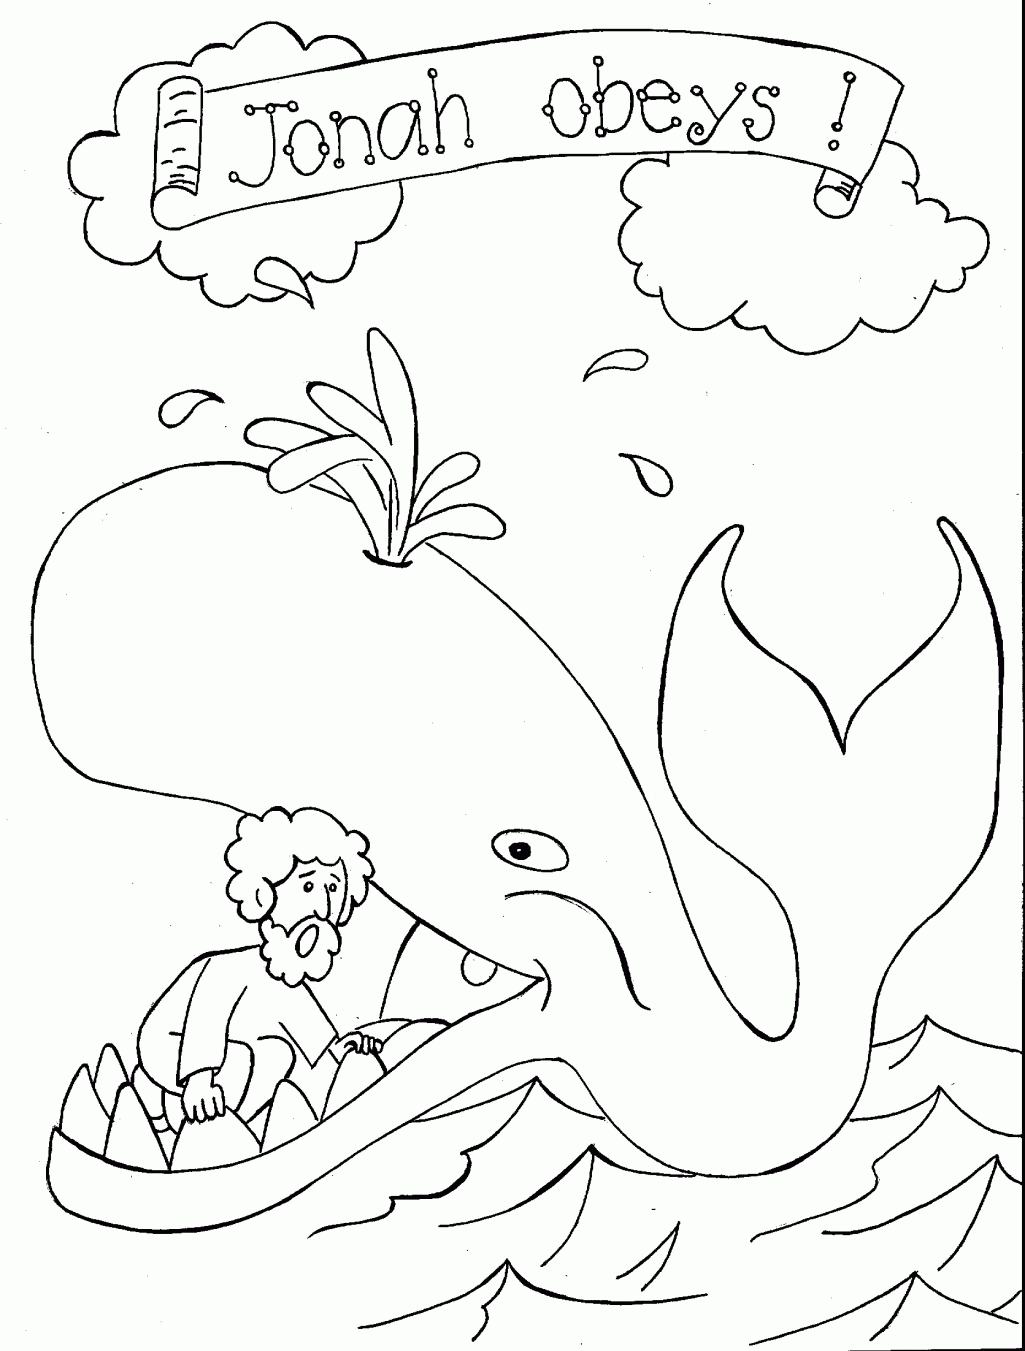 sunday school coloring pages for kids. sunday school coloring ...